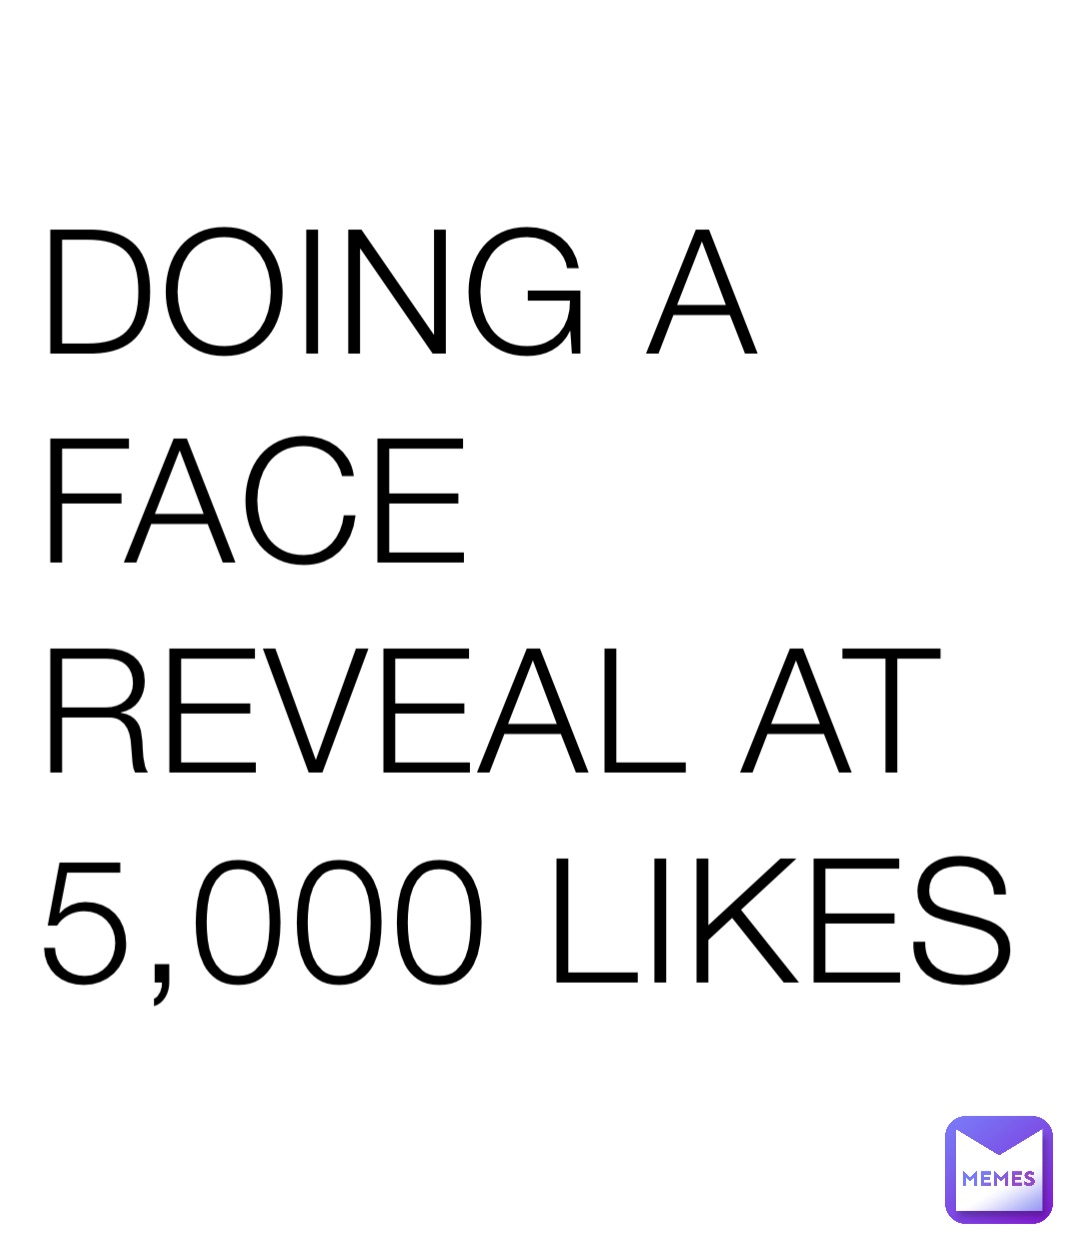 DOING A FACE REVEAL AT 5,000 LIKES